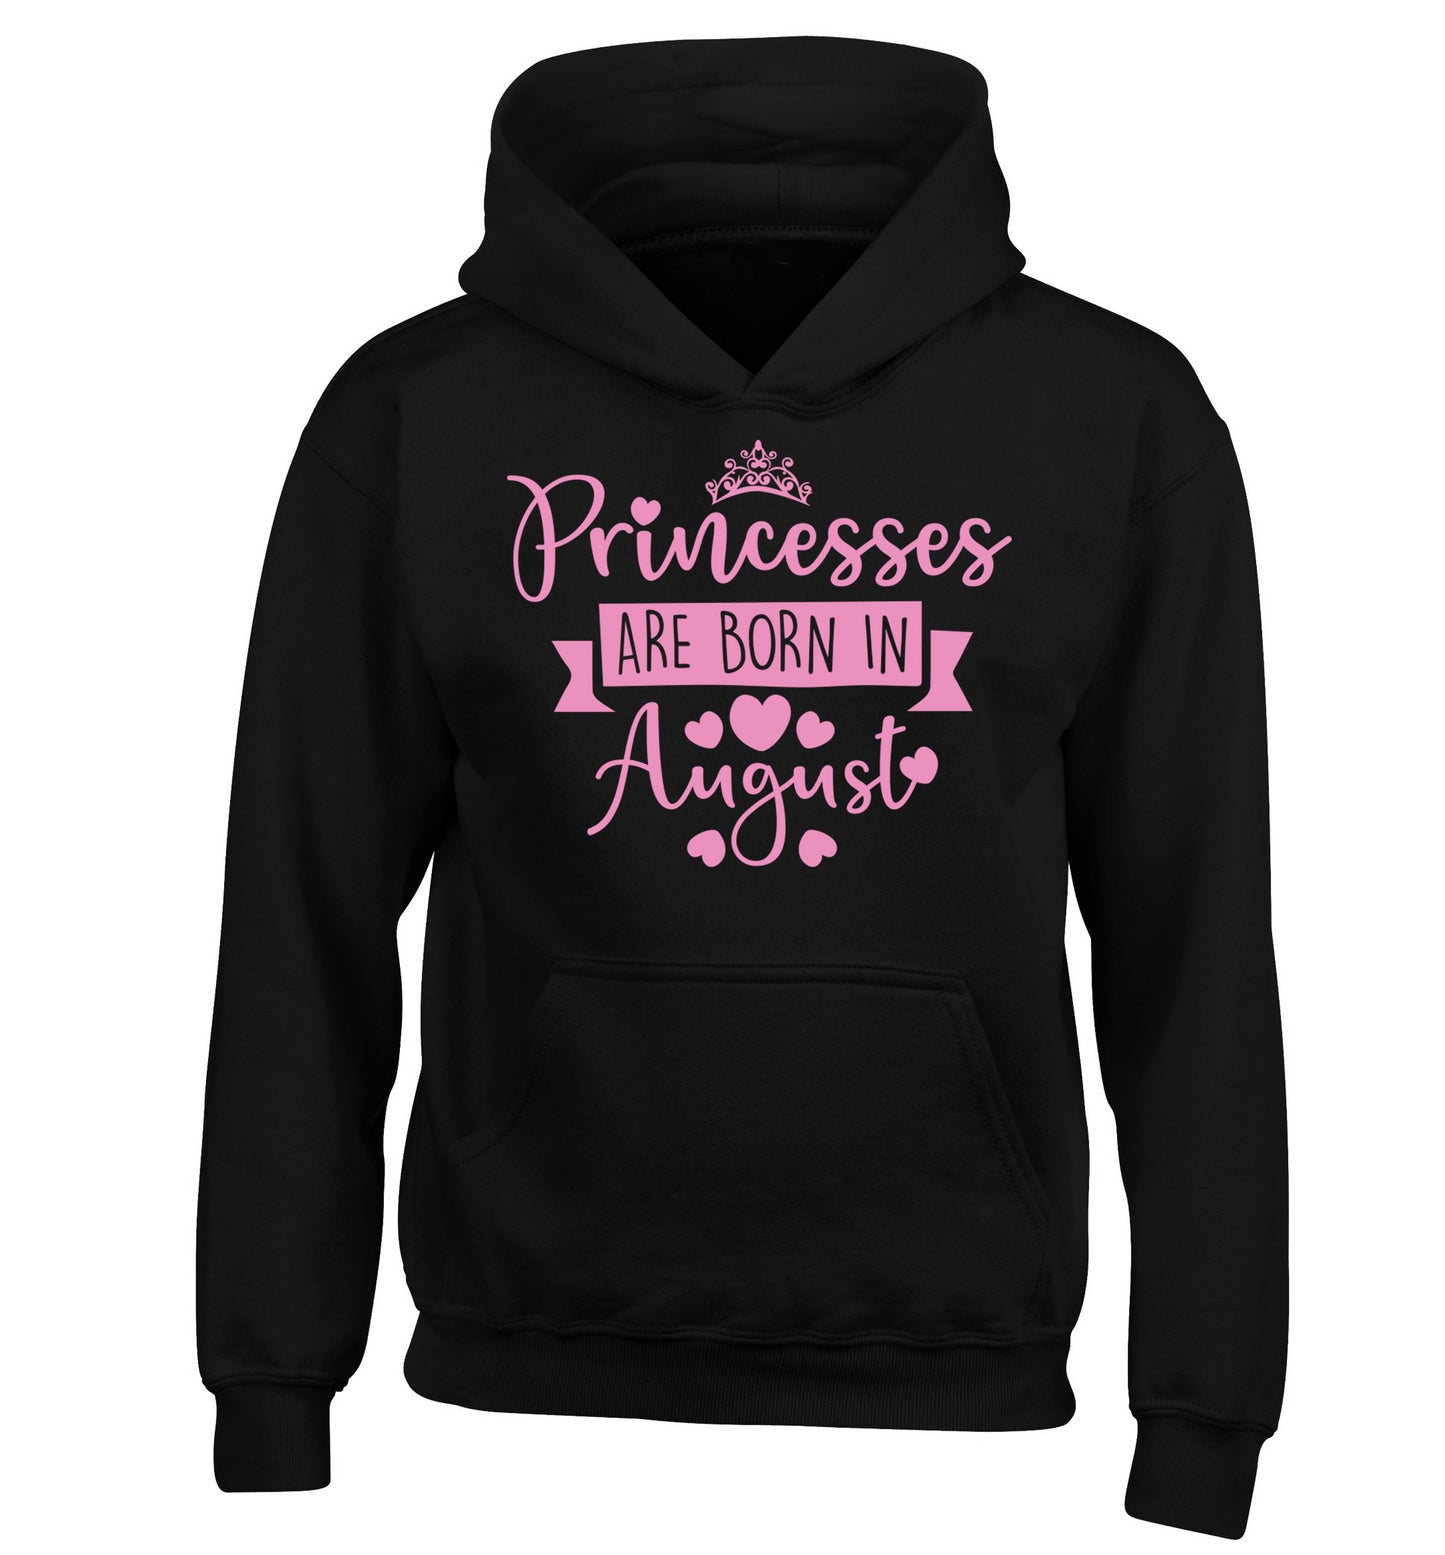 Princesses are born in August children's black hoodie 12-13 Years